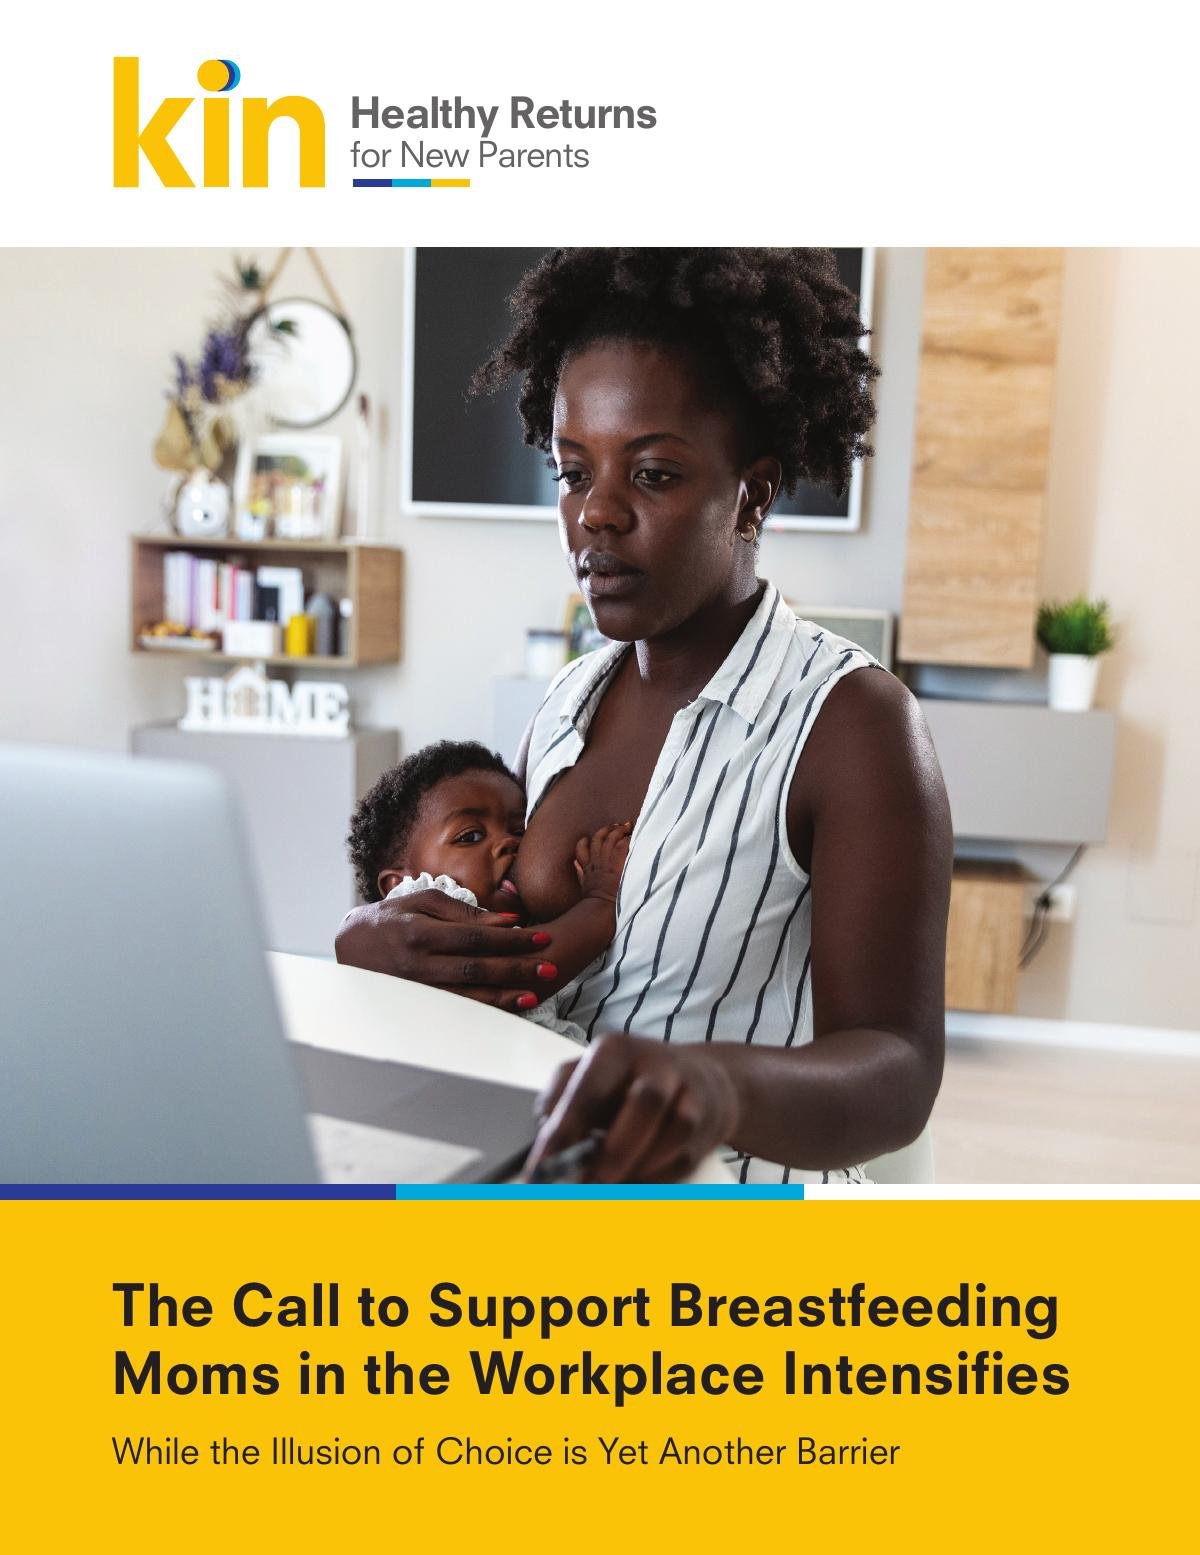 The Call to Support Breastfeeding Moms in the Workplace Intensifies